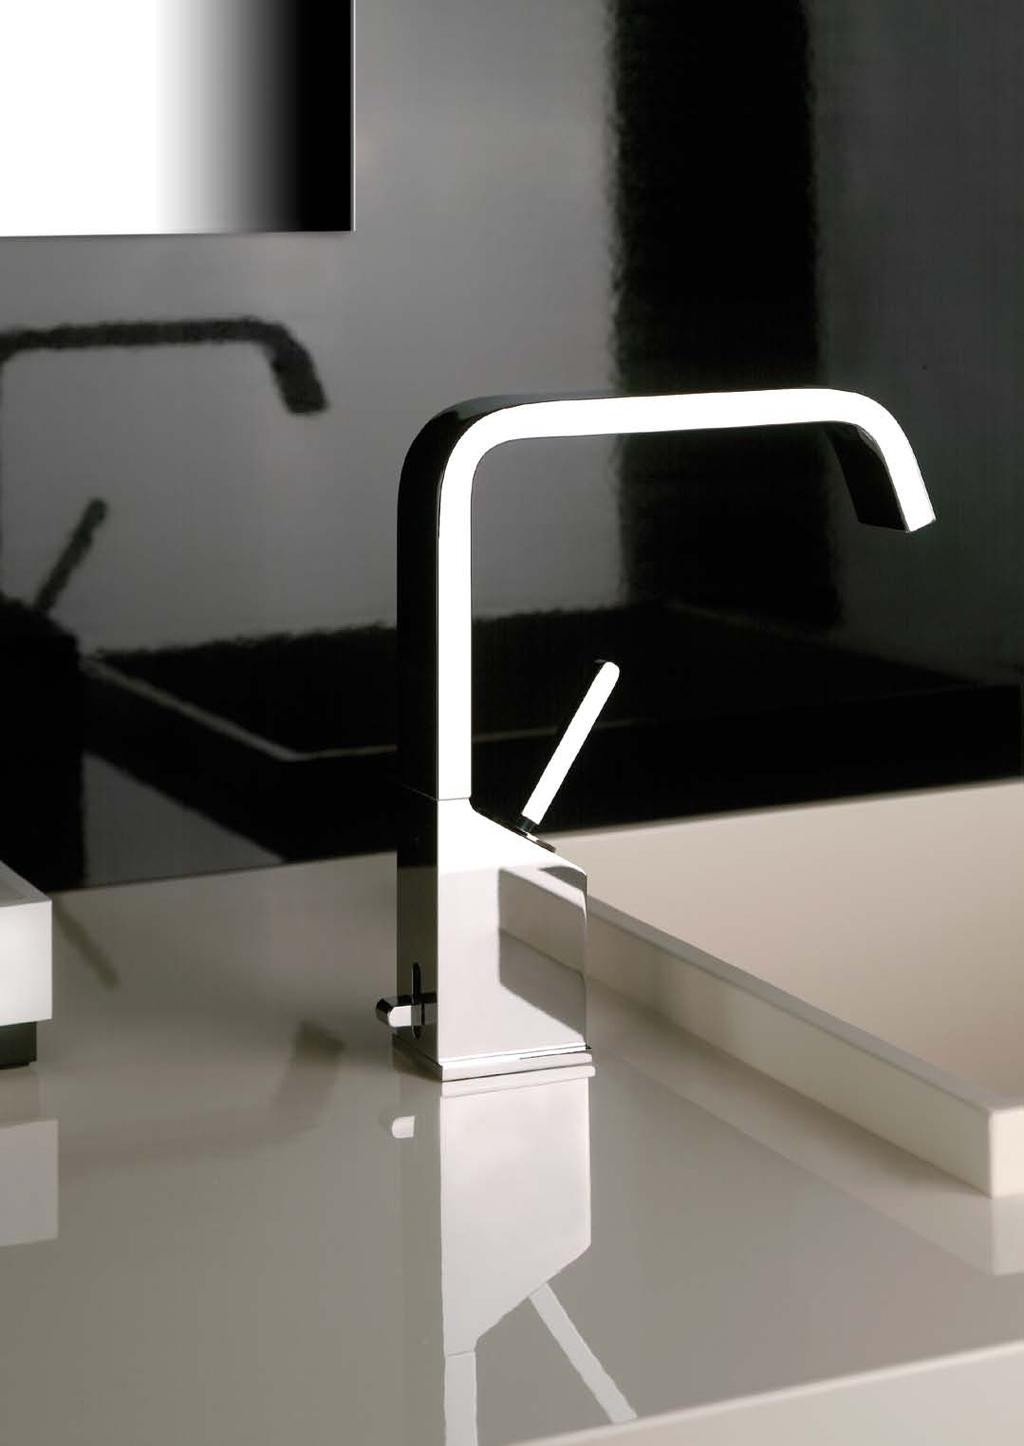 The stunning, sculptural lines of the XL tapware range are as